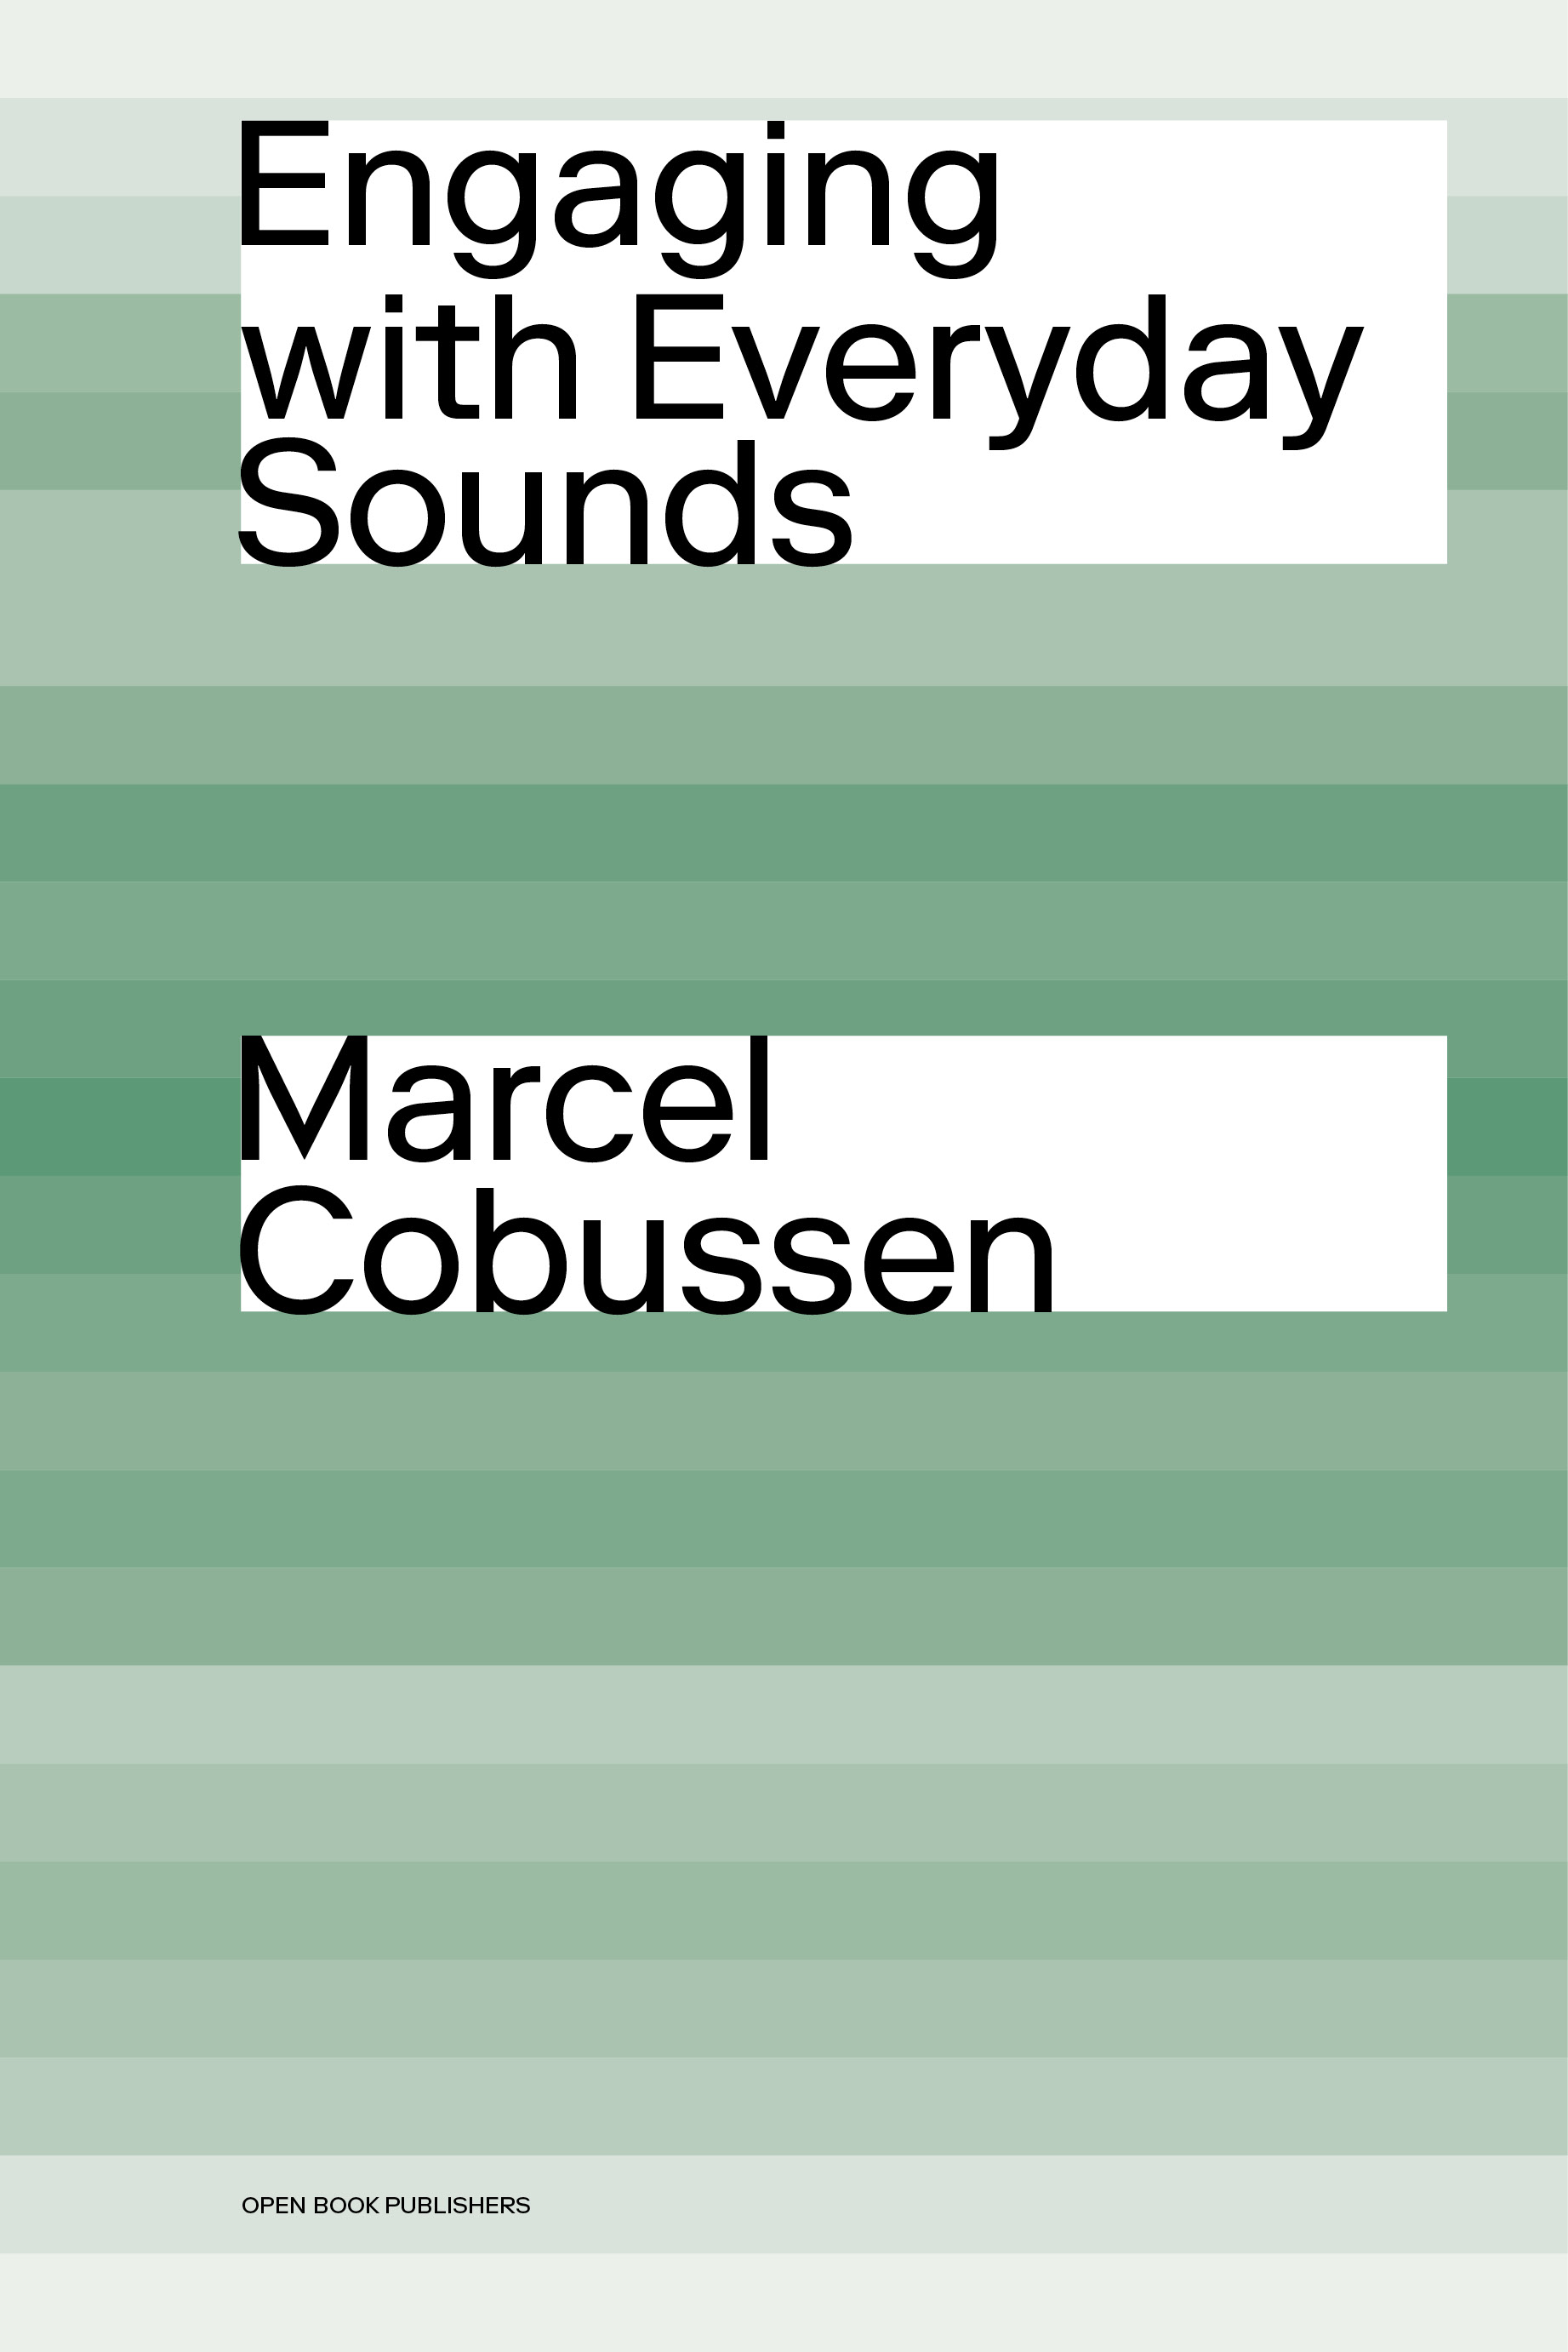 Engaging with Everyday Sounds book cover image